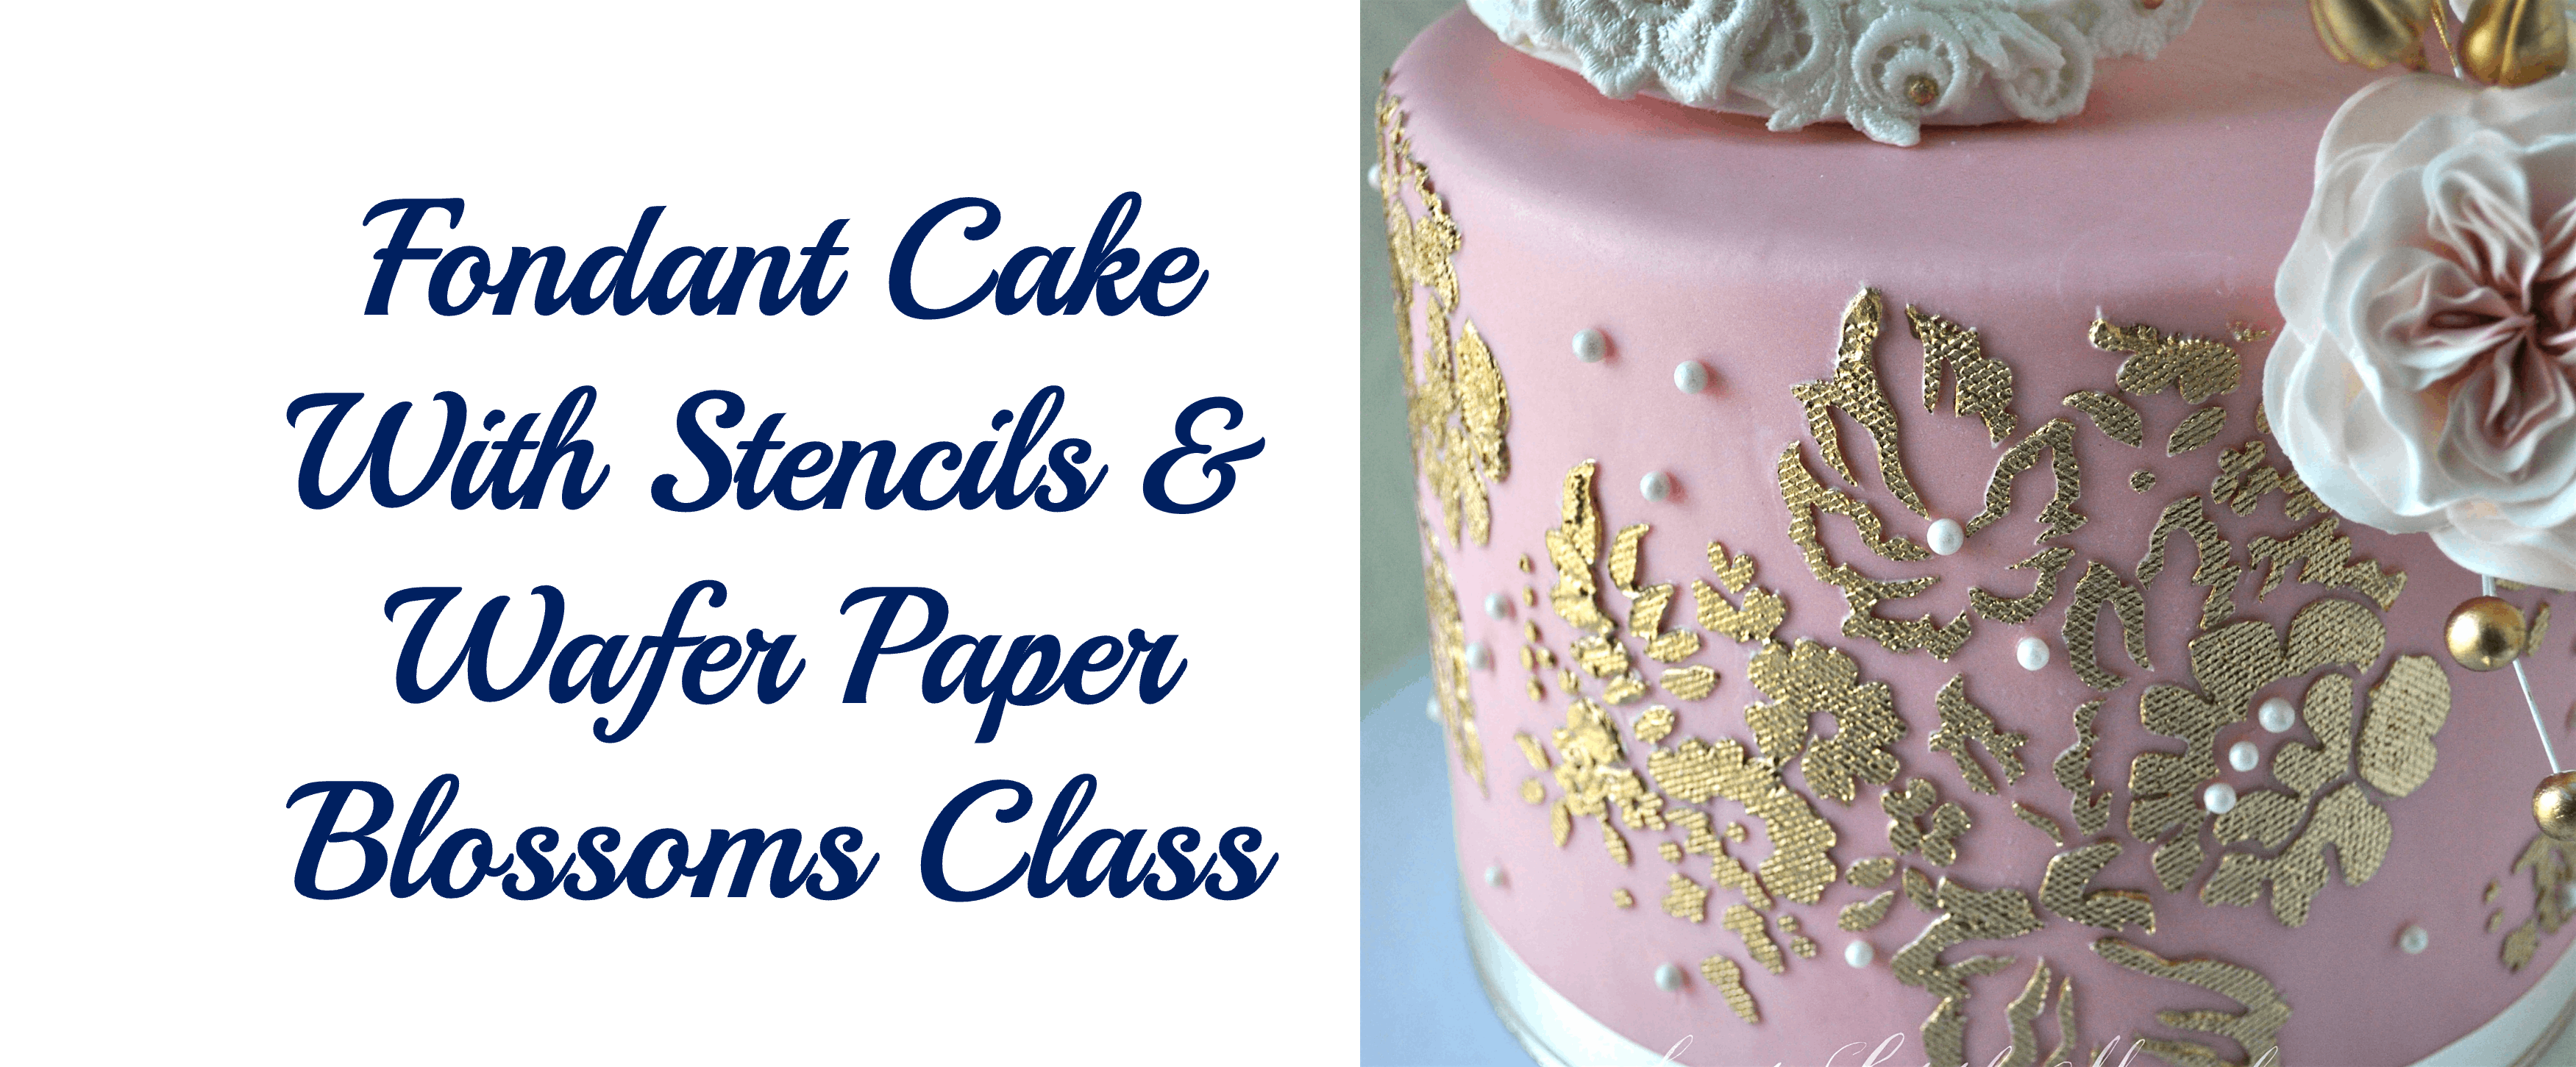 Fondant Cake Class w/Stencil & Wafer Paper Blossoms – Frans Cake and Candy